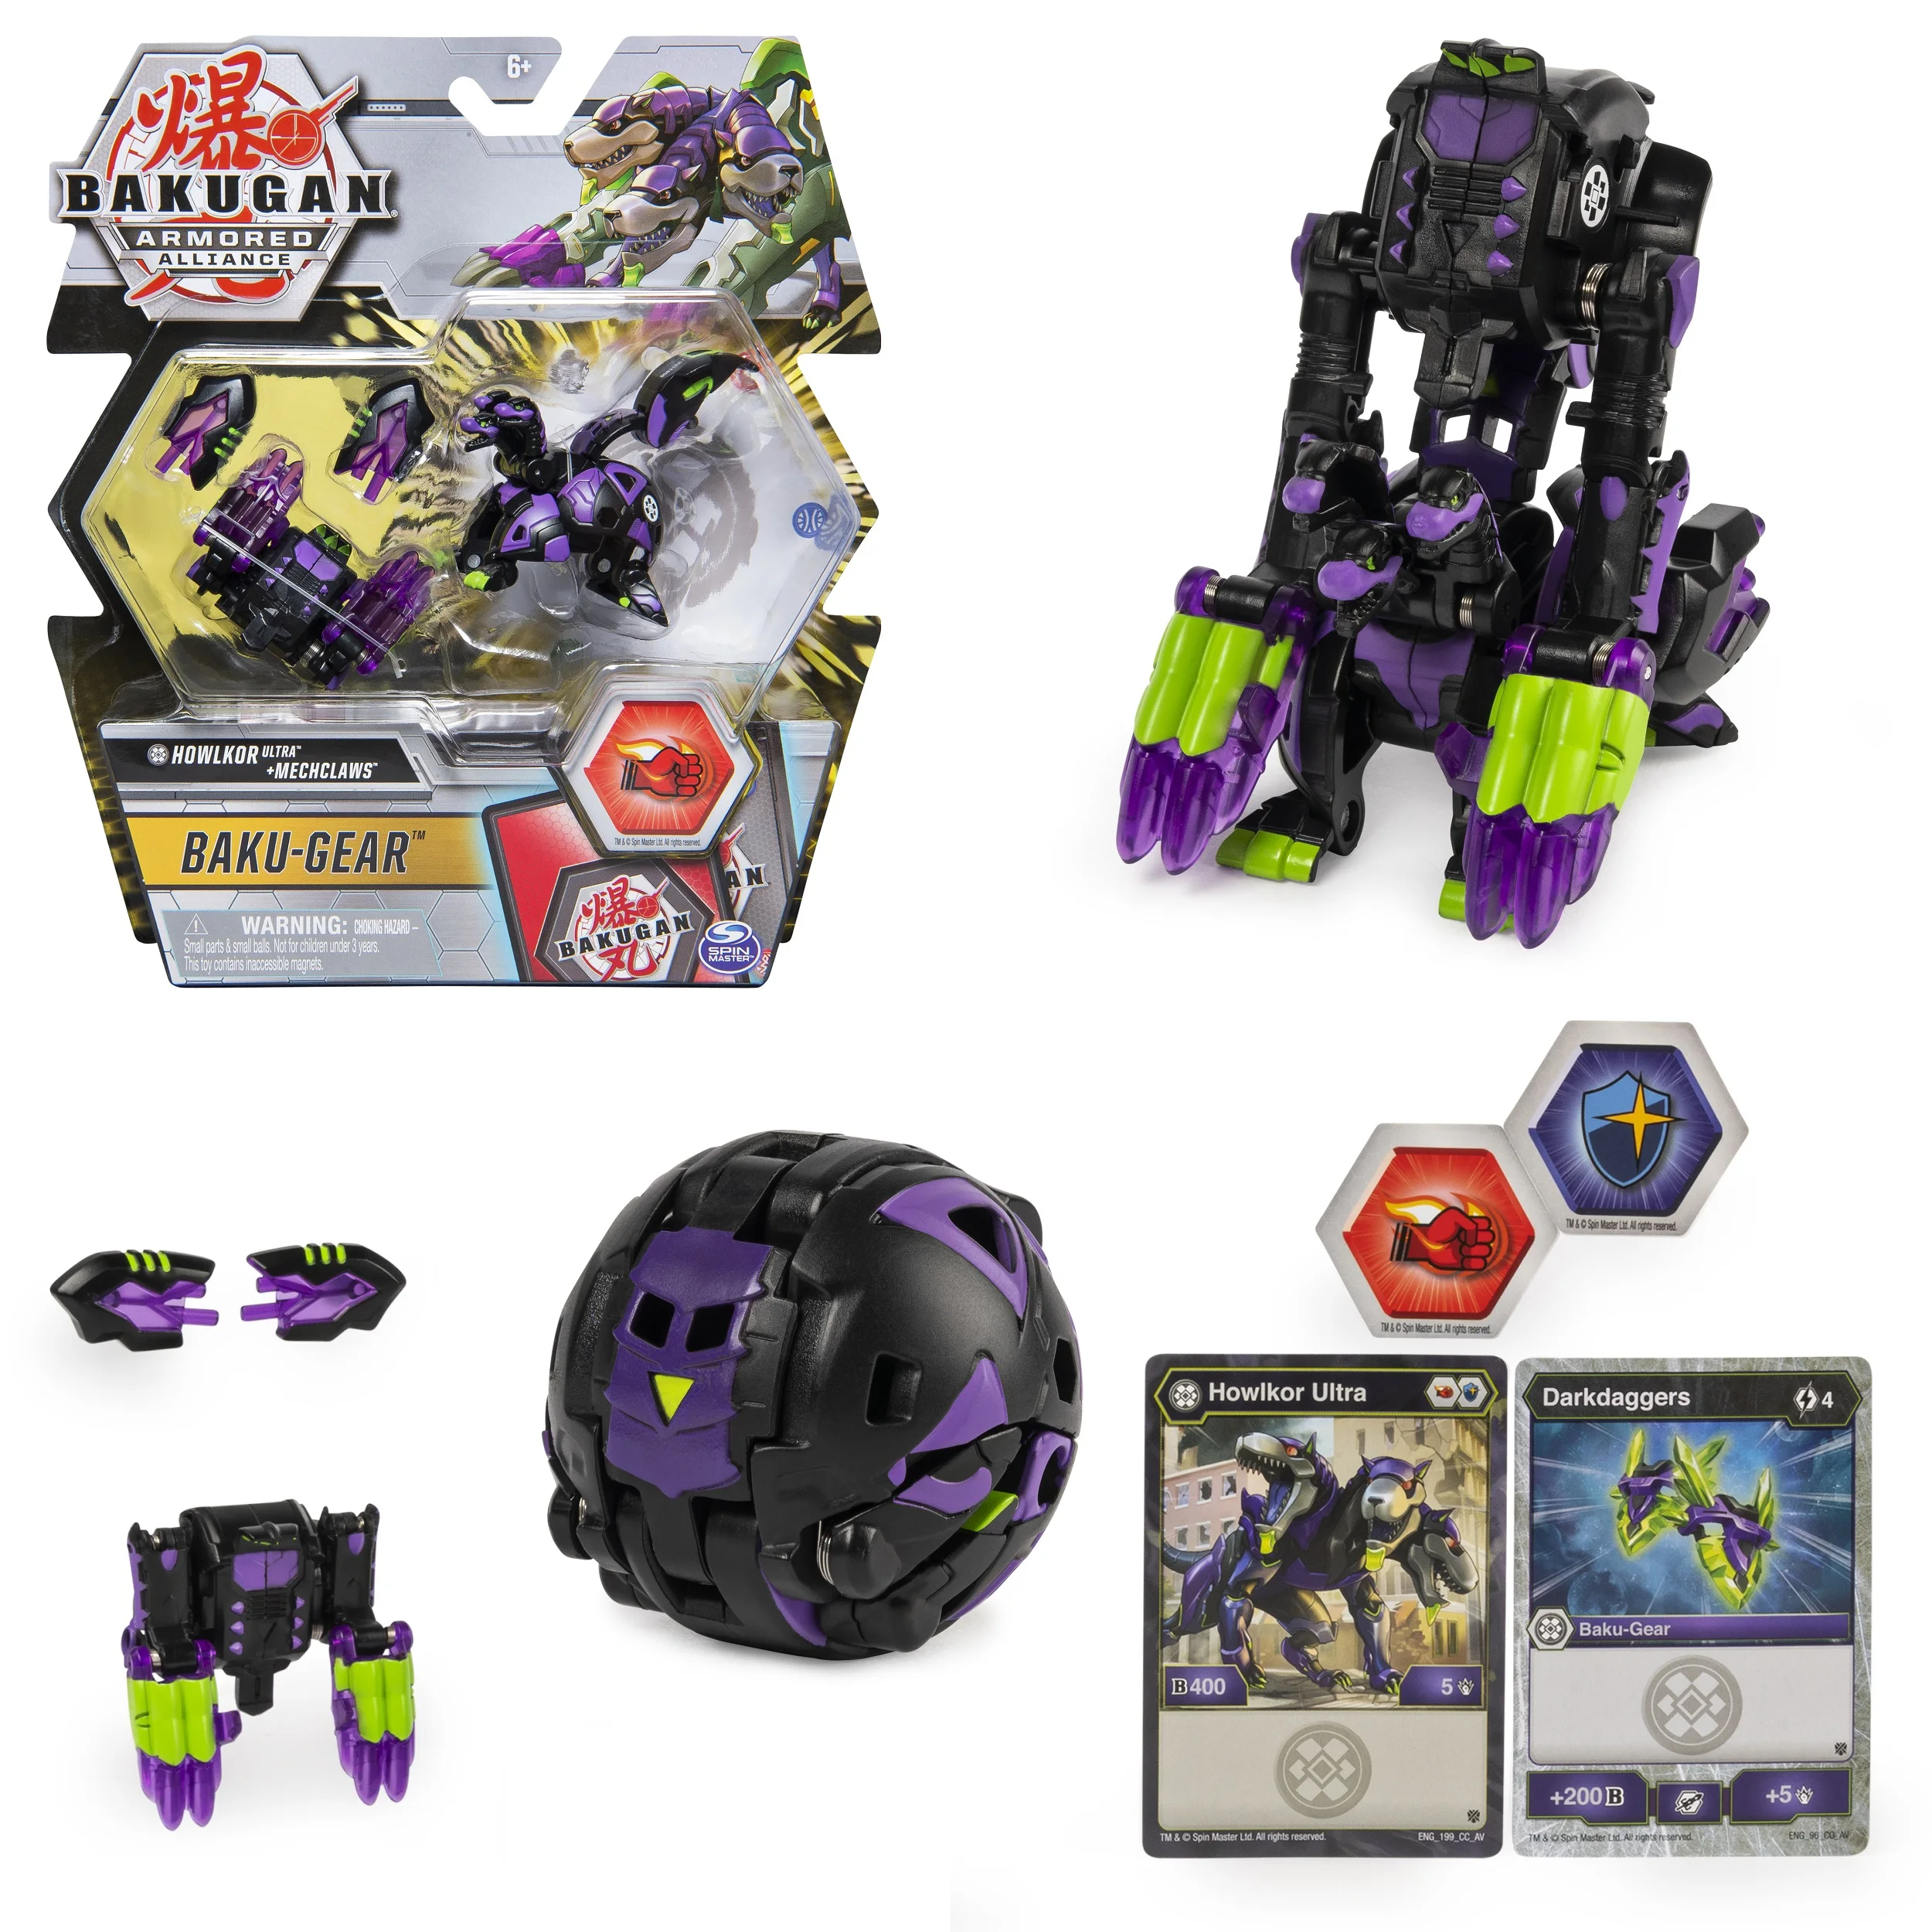 

Bakugan Armored Alliance New Style HOWLKOR Deformable Battle Toys Action Figure Model Toys Boy Gifts